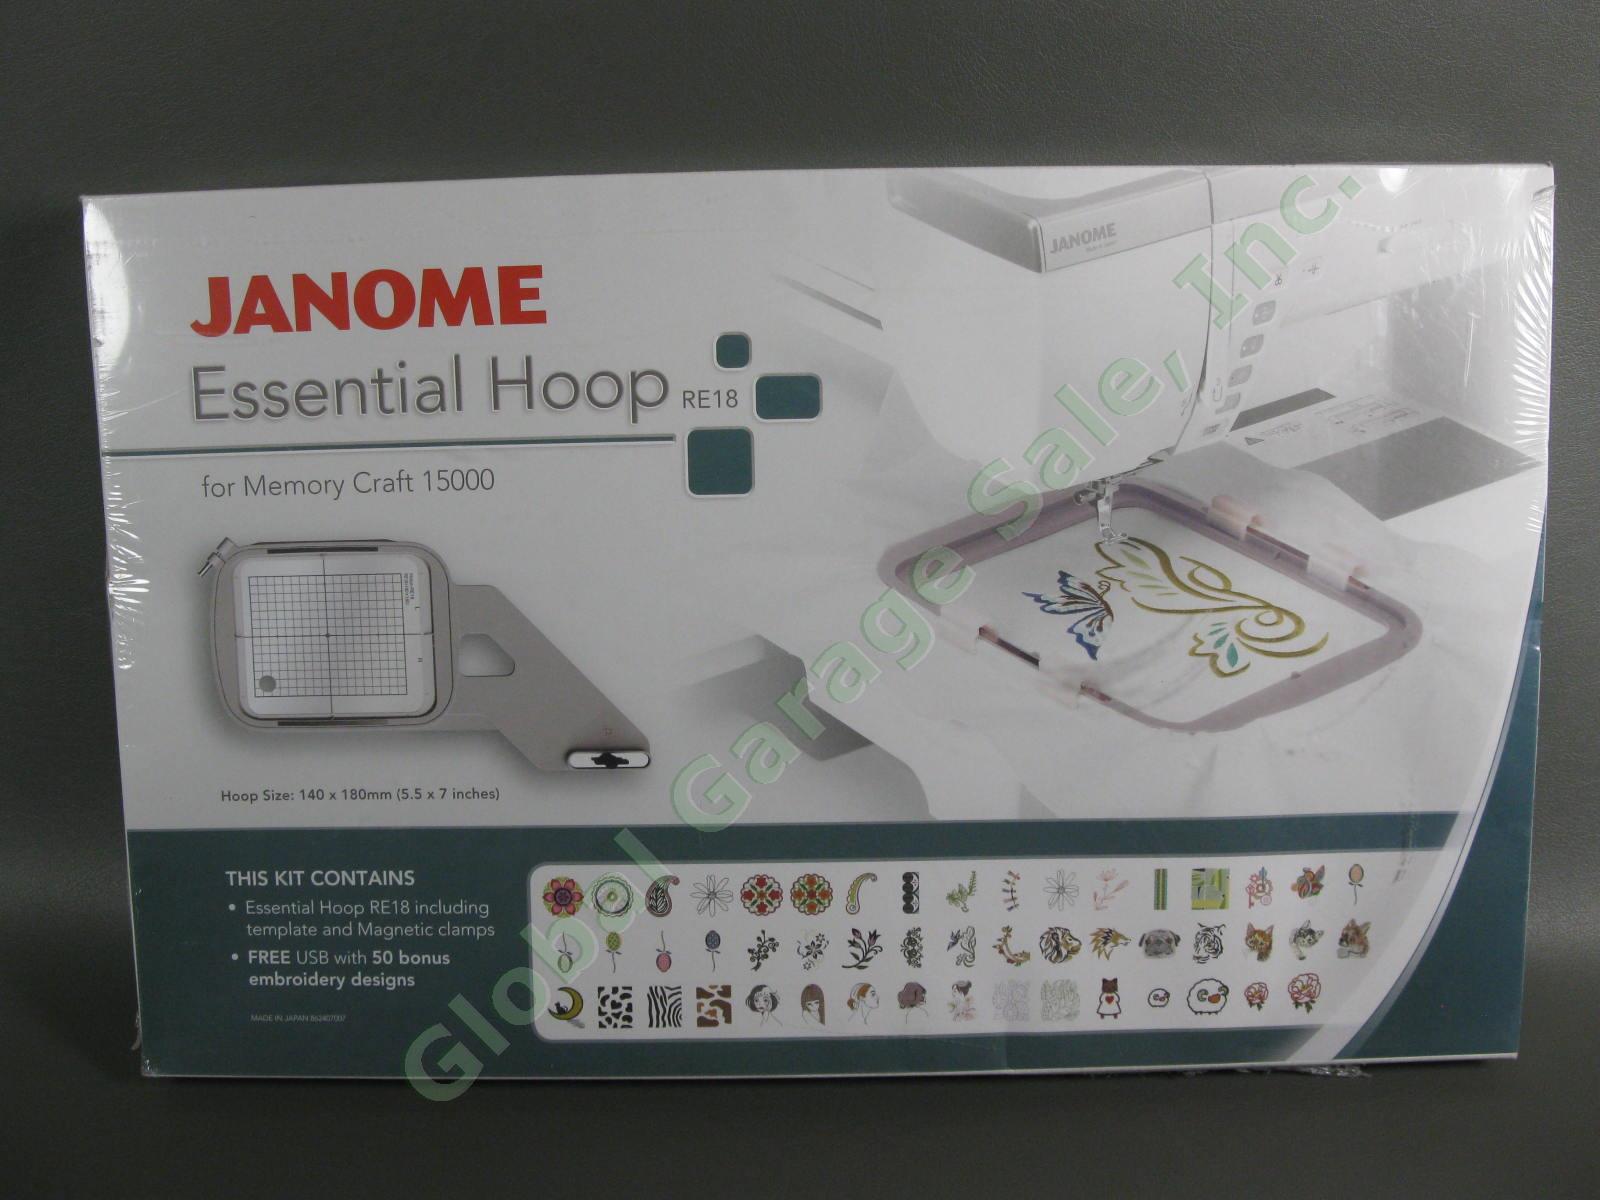 Janome Essential Hoop RE18 Memory Craft 15000 MC15000 Sewing Machine Embroidery